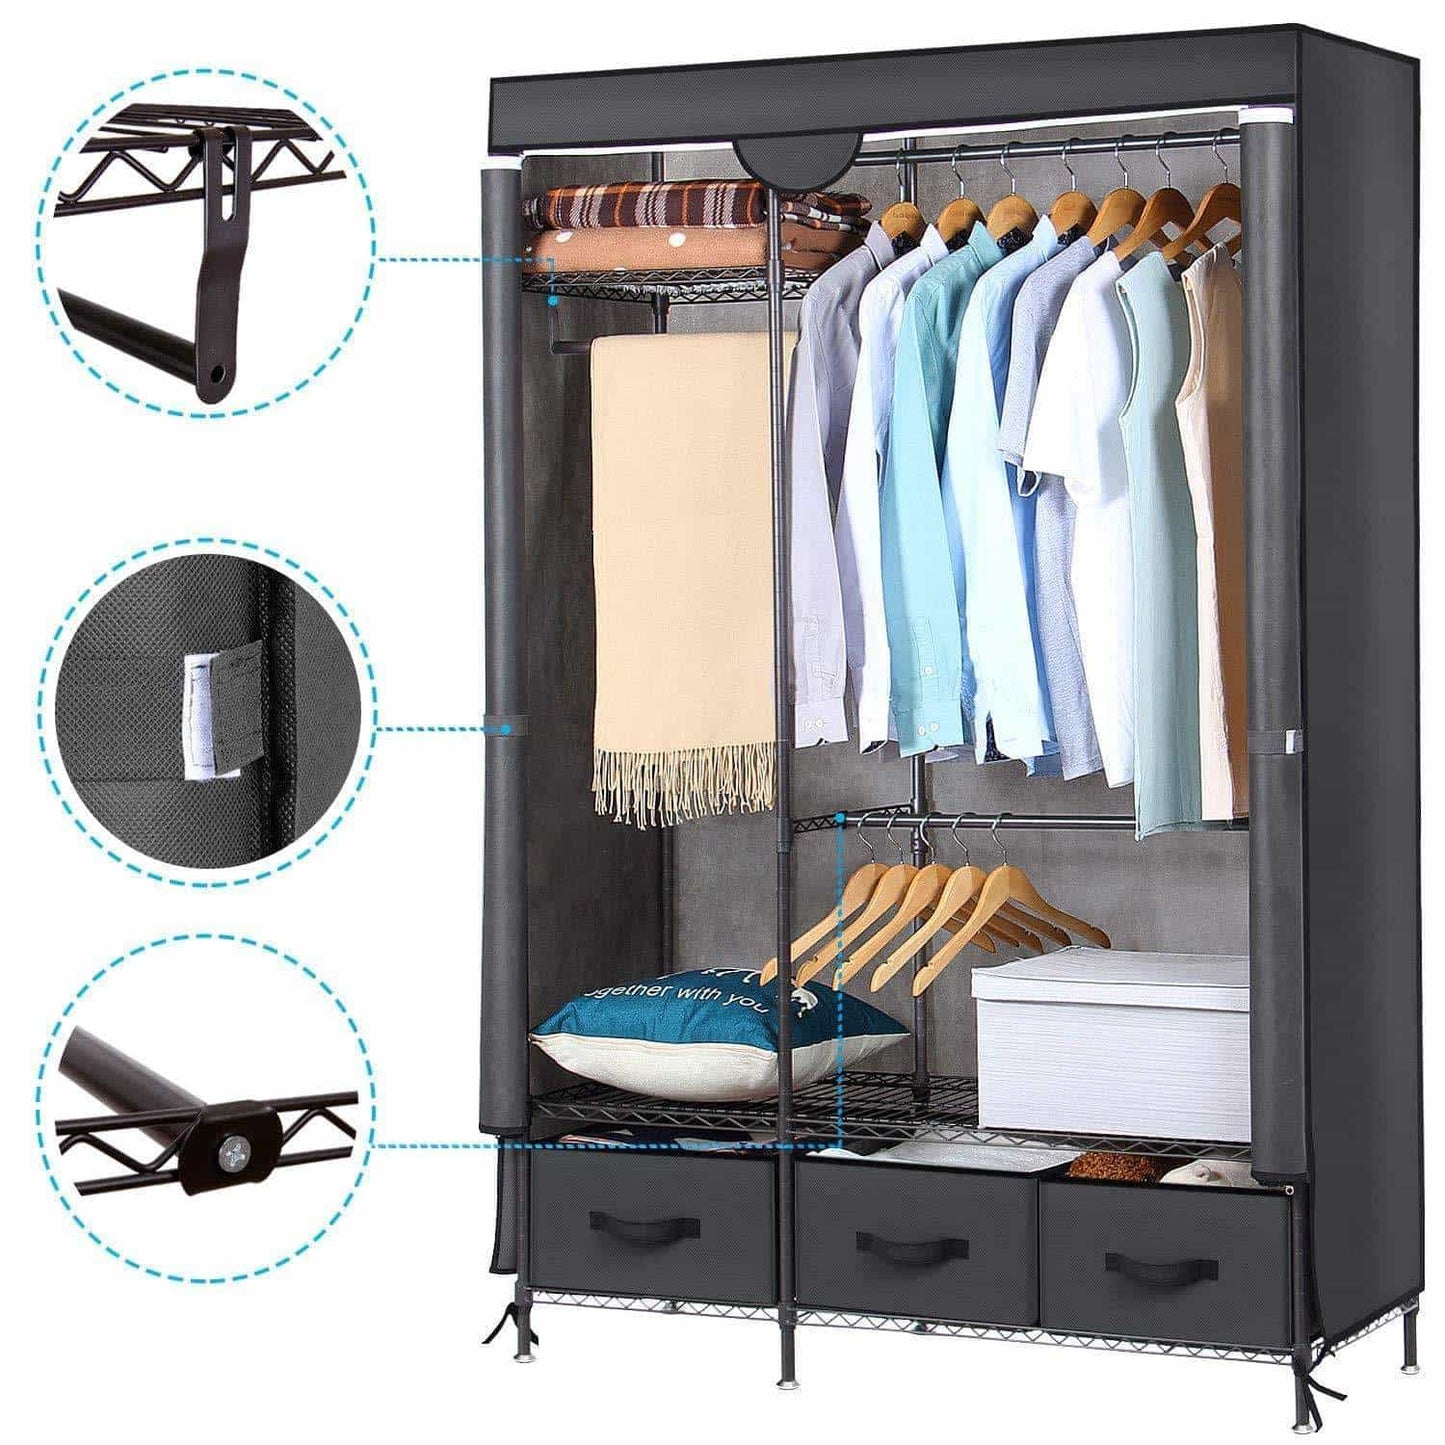 Organize with lifewit full metal closet organizer wardrobe closet portable closet shelves with adjustable legs non woven fabric clothes cover and 3 drawers sturdy and durable